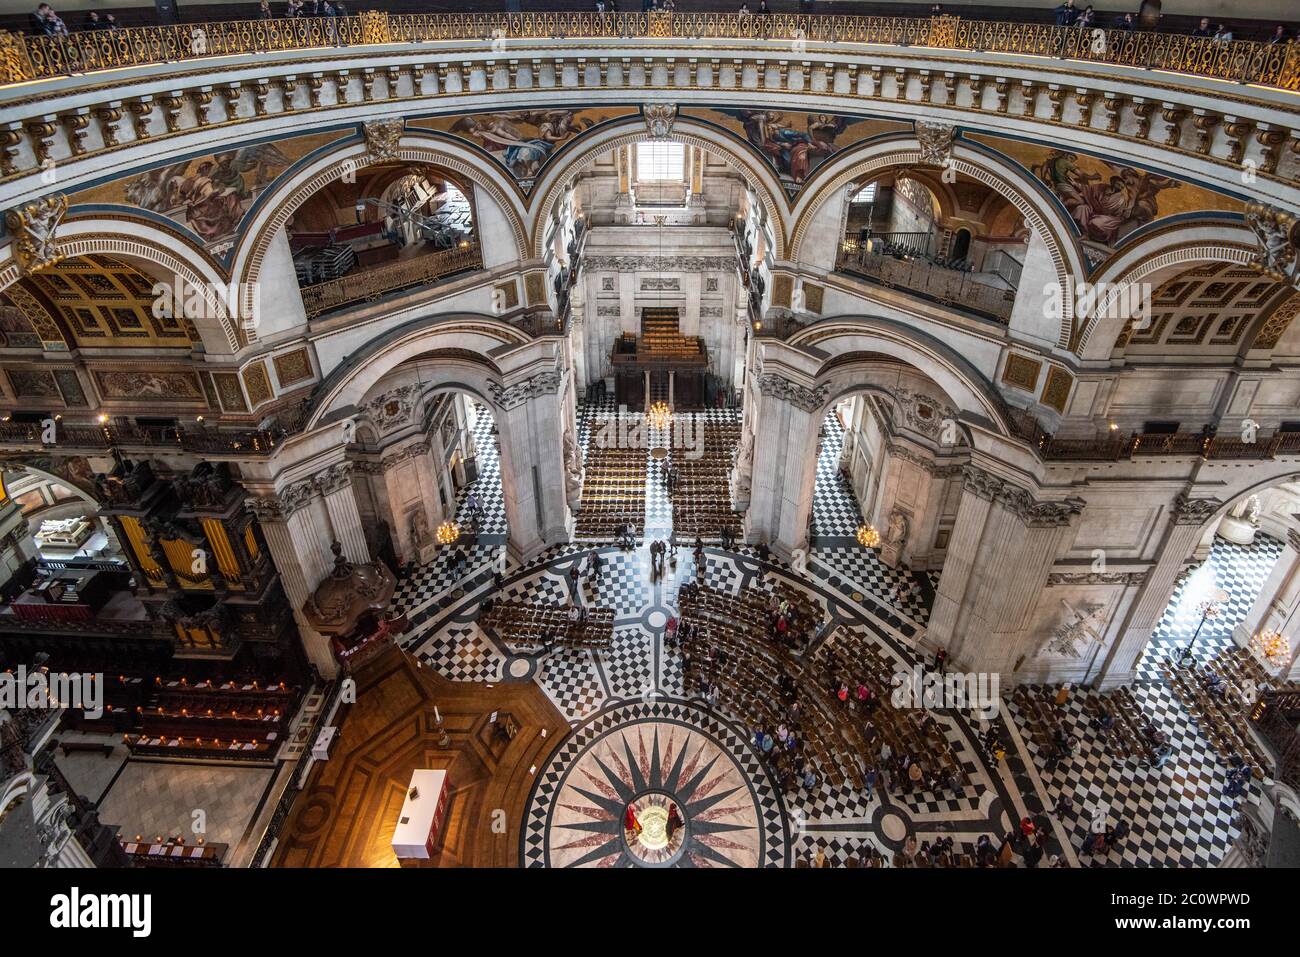 St Paul's Cathedral, London, England. Inside the cathedral taken from the Whispering Gallery. The Whispering Gallery can be seen in the top of the pic Stock Photo